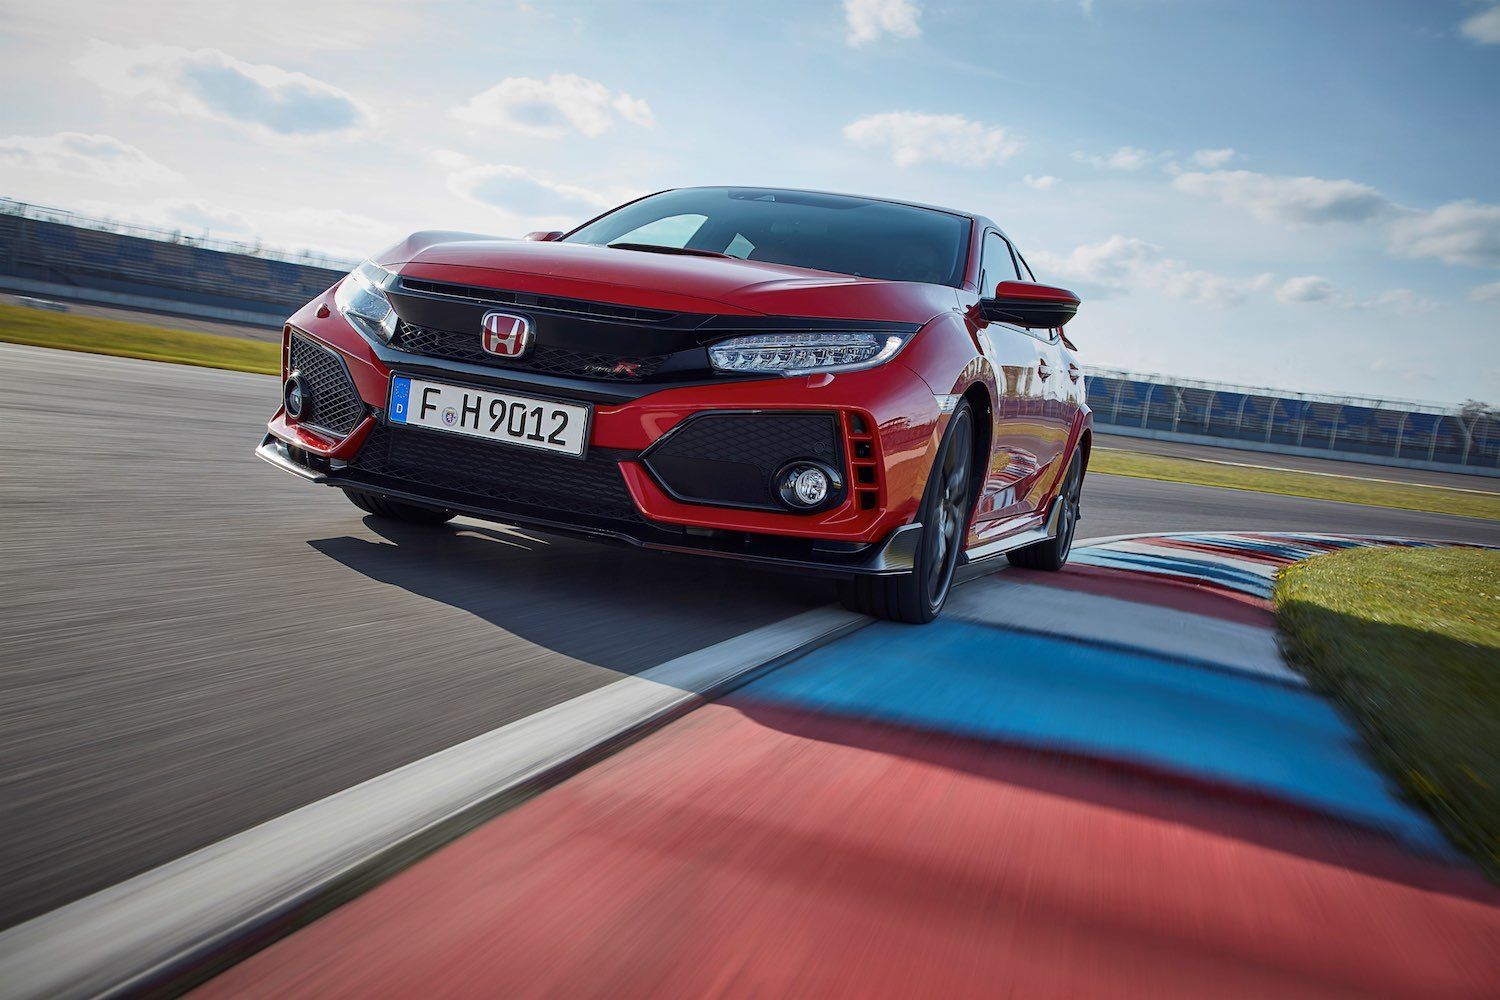 Tim Barnes-Clay reviews the 2018 Honda Civic Type R at the first drives 10